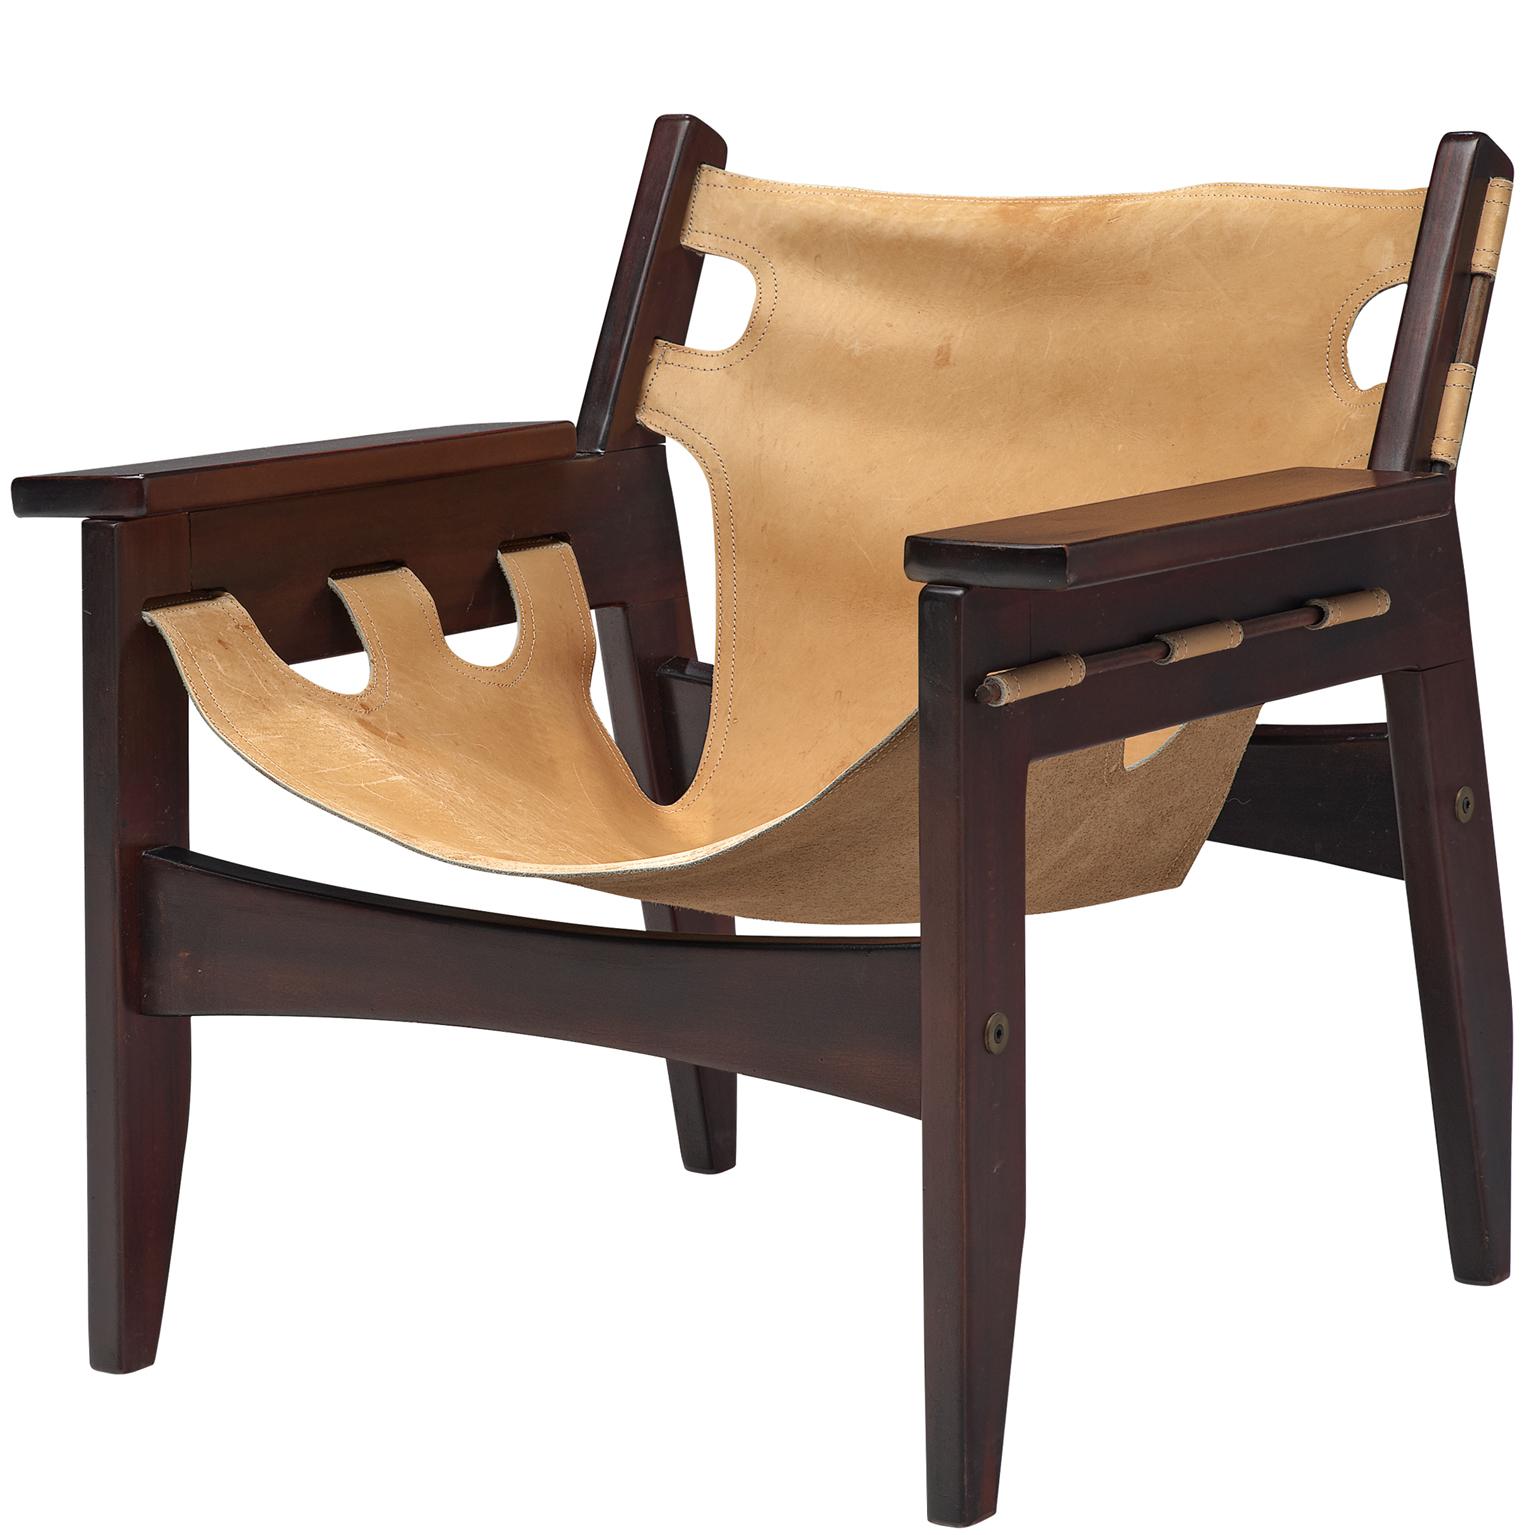 Sergio Rodrigues 'Kilin' Rosewood Armchair with Beige Leather